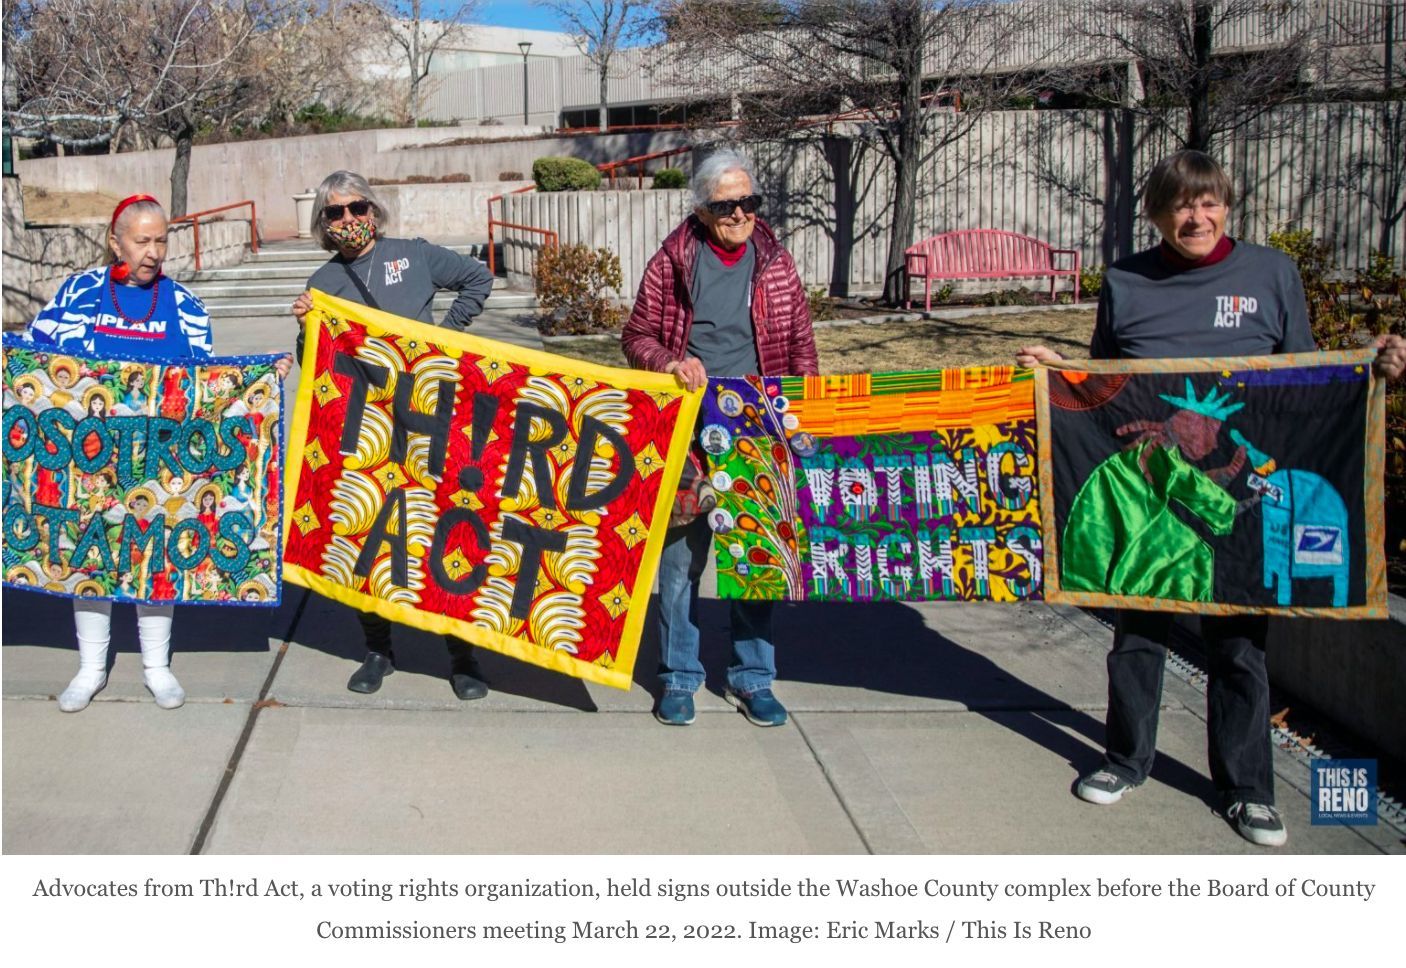 Third Act Nevada rallies to defeat anti-voter rule in Washoe County.